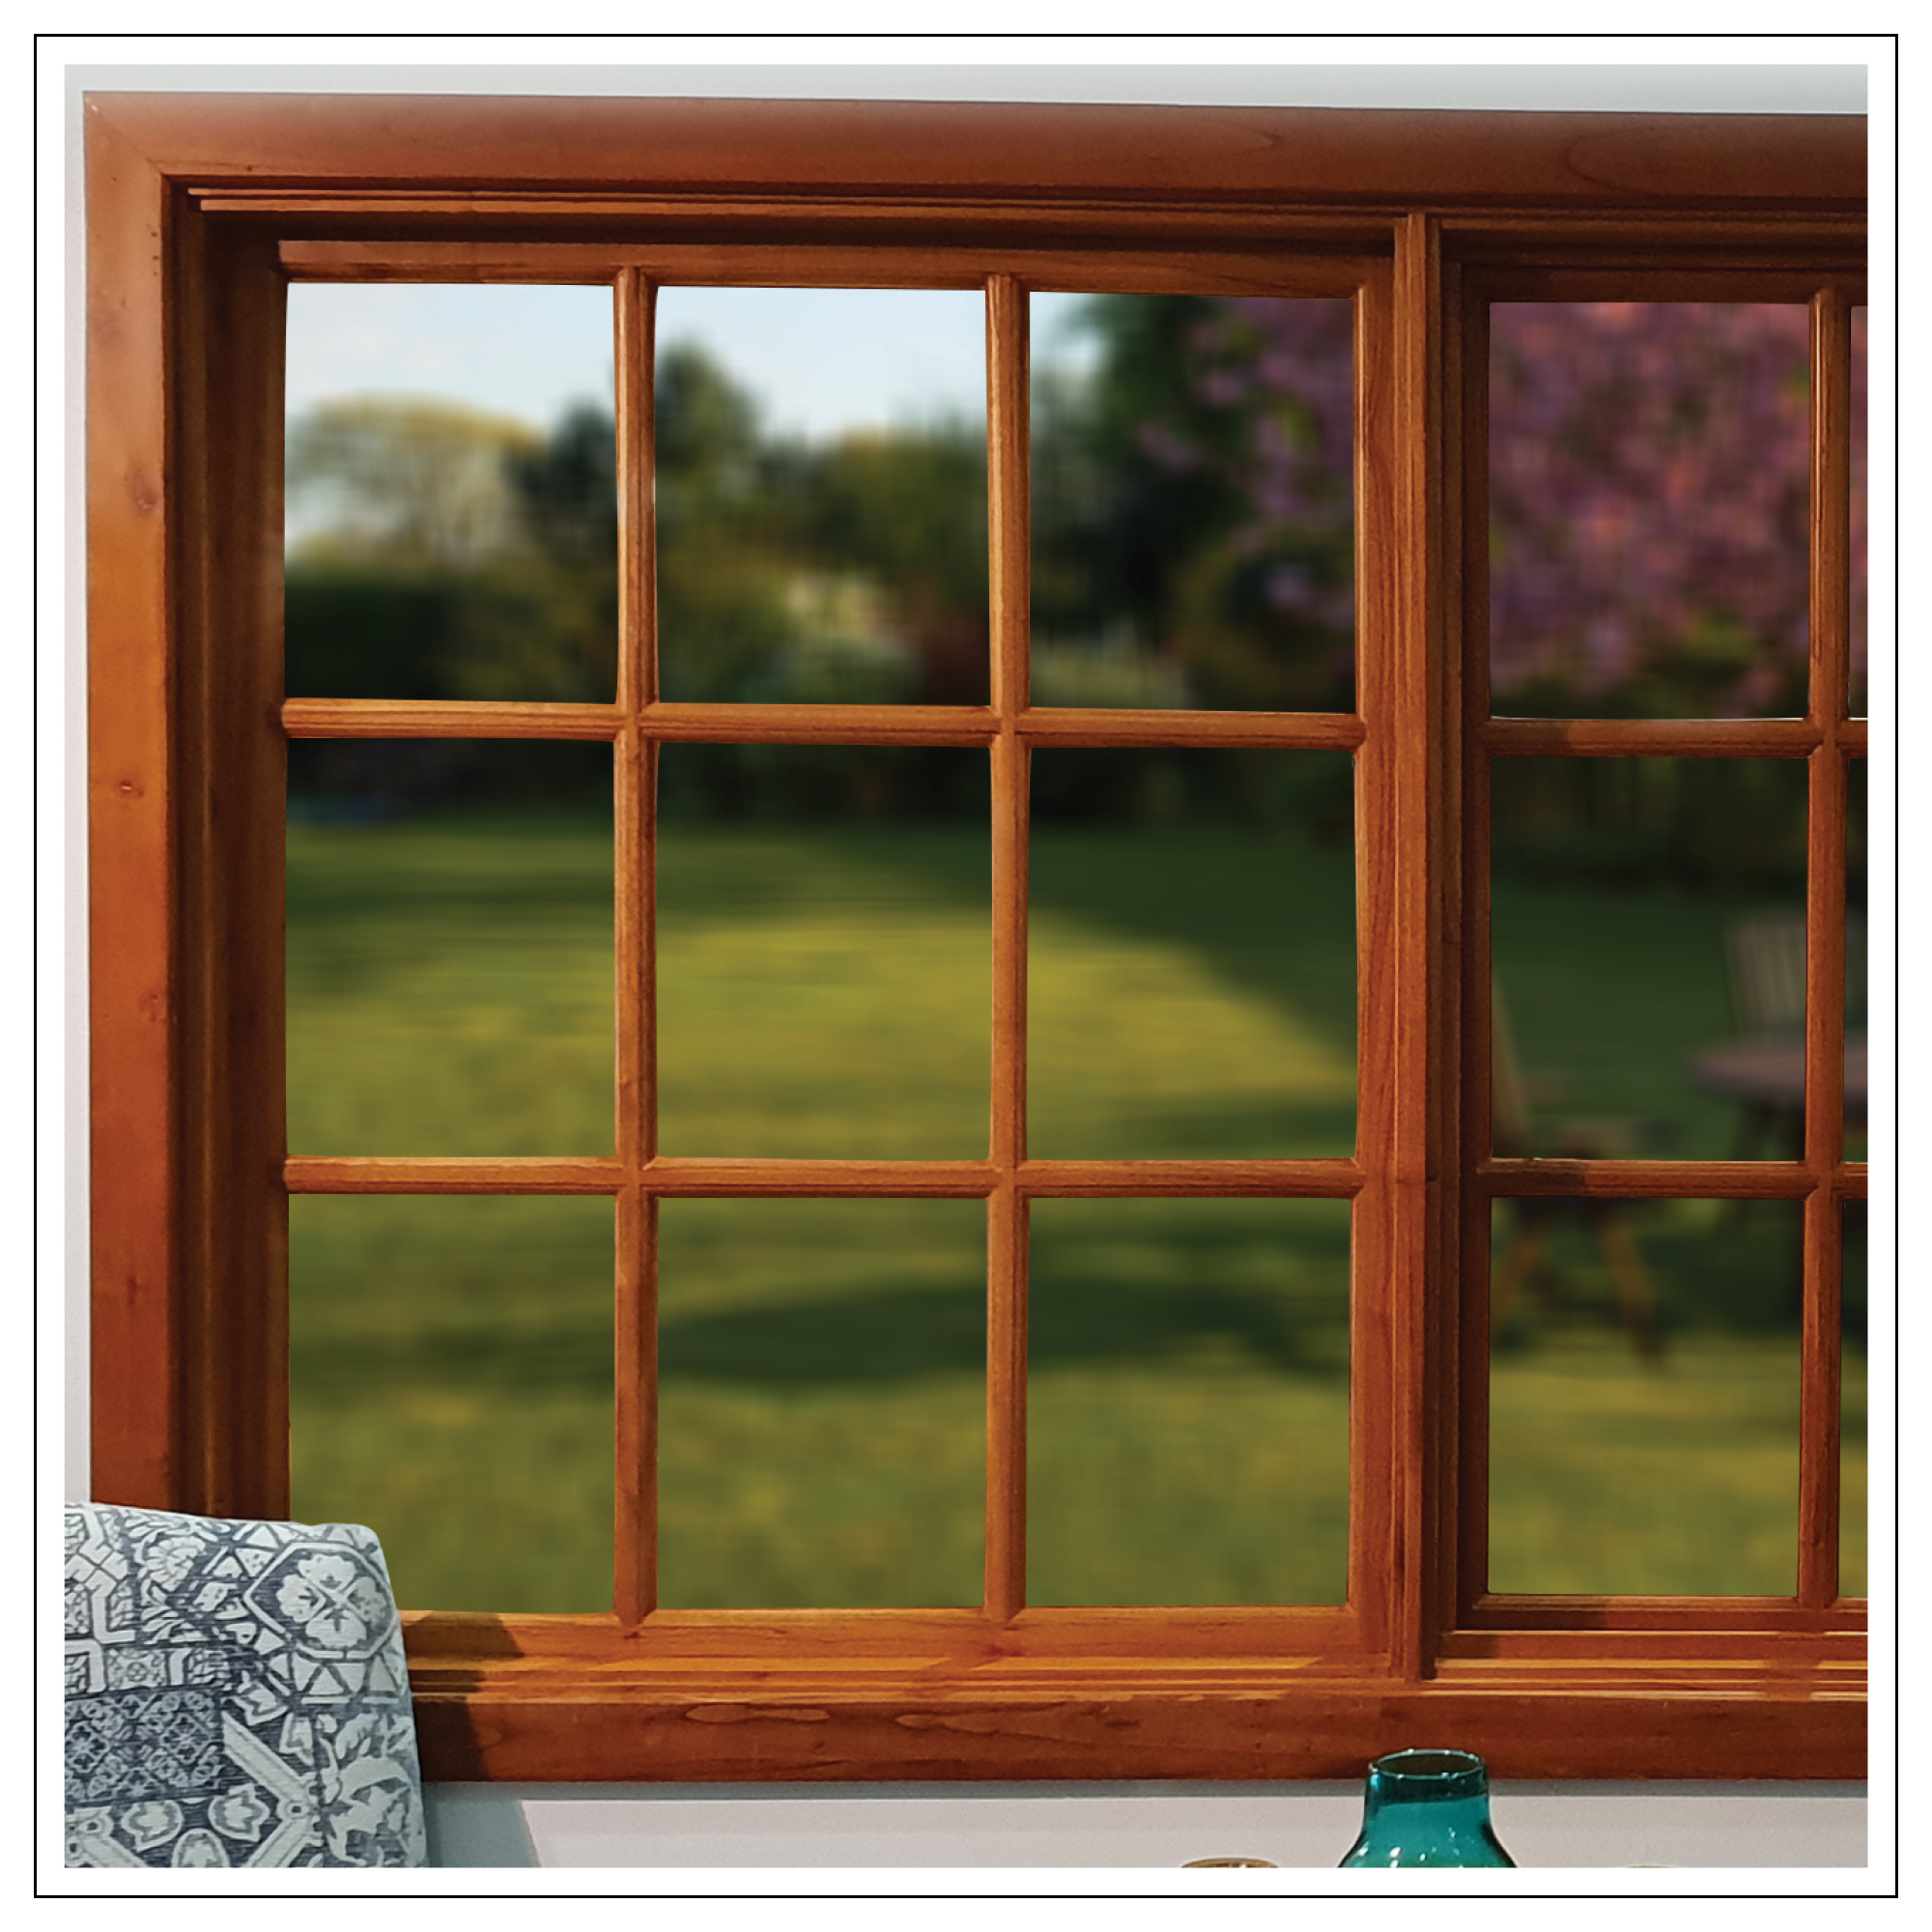 Cedar colonial awning window with winder looking out to garden